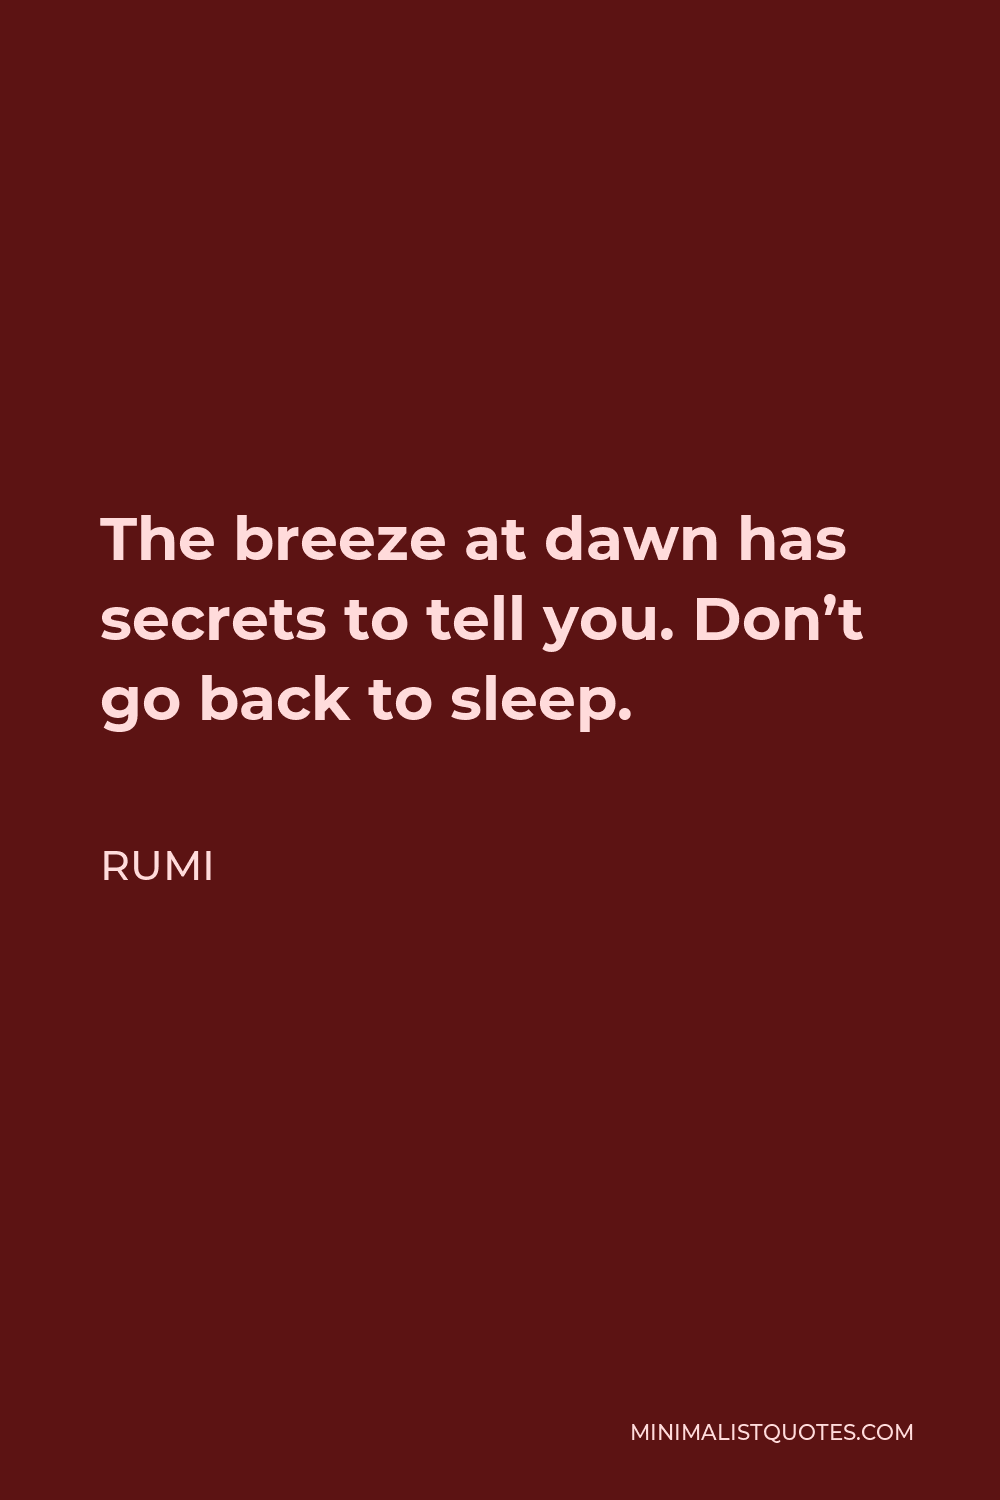 Rumi Quote - The breeze at dawn has secrets to tell you. Don’t go back to sleep.